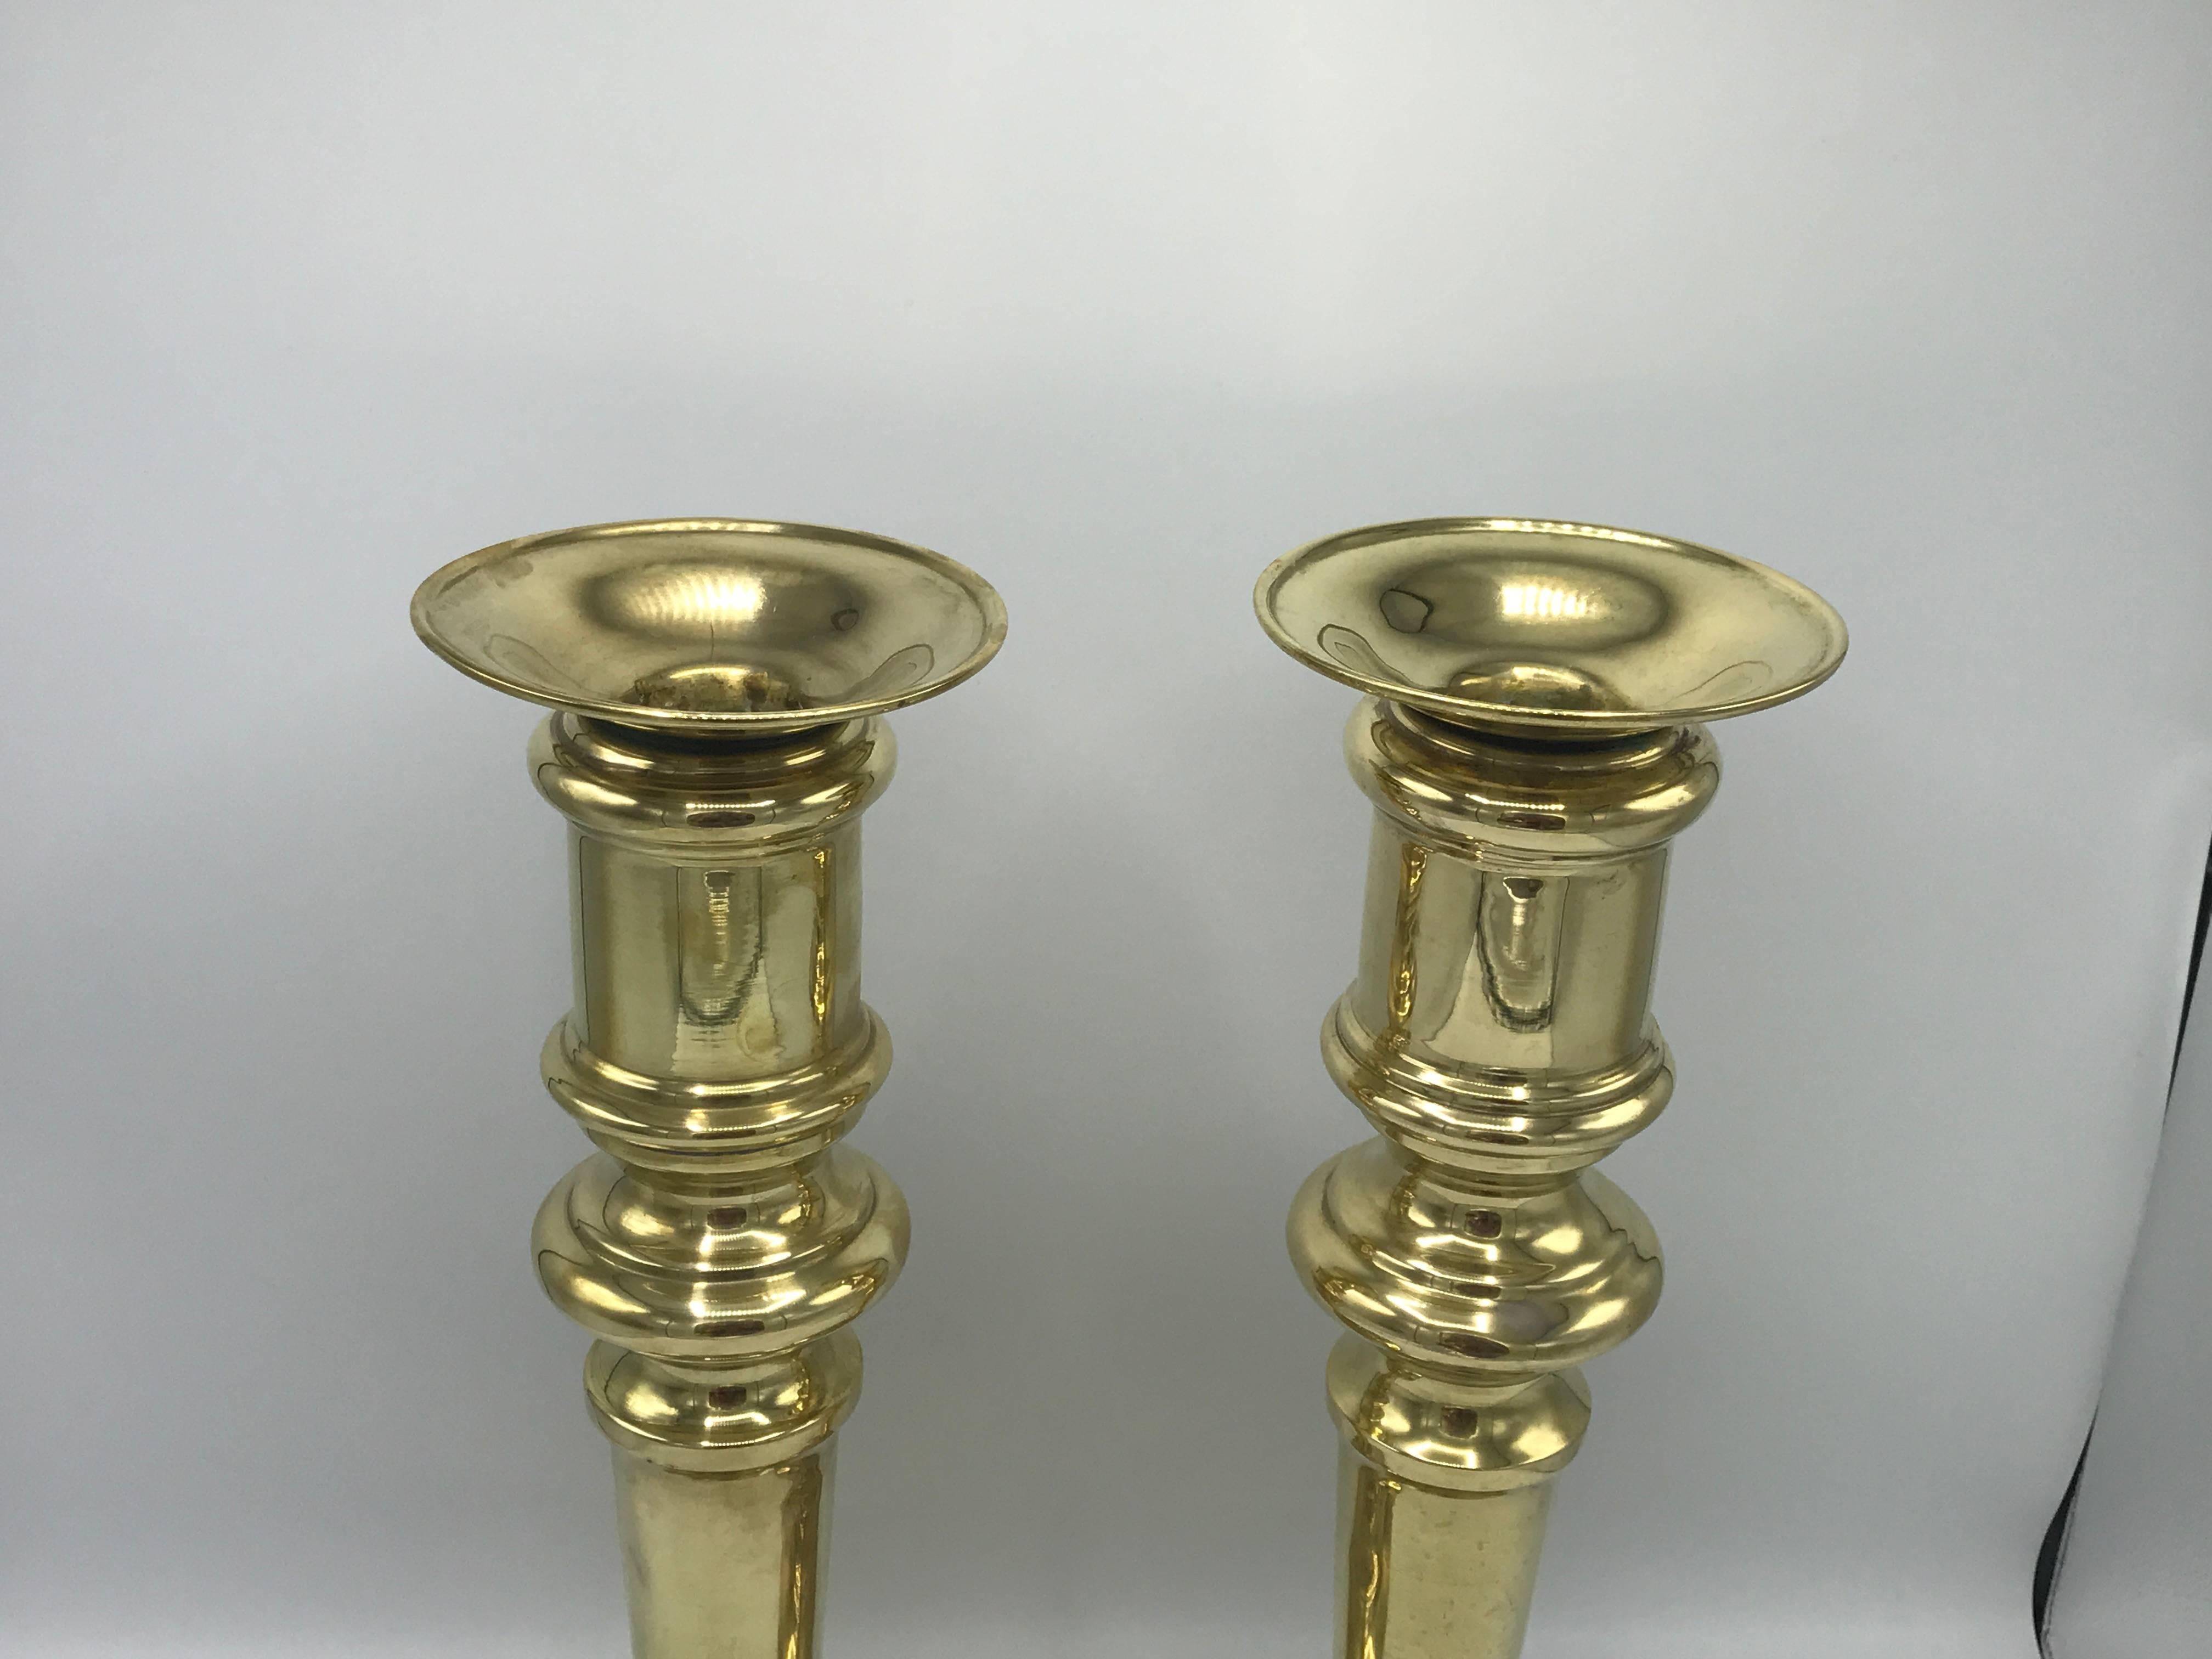 Offered is a stunning and substantial, pair of 1970s Dunhill brass candlestick holders. Heavy. Previous owner converted them into lamps, they still have the small hole in the back and top centre to convert back to lamps if buyer wishes to do so.